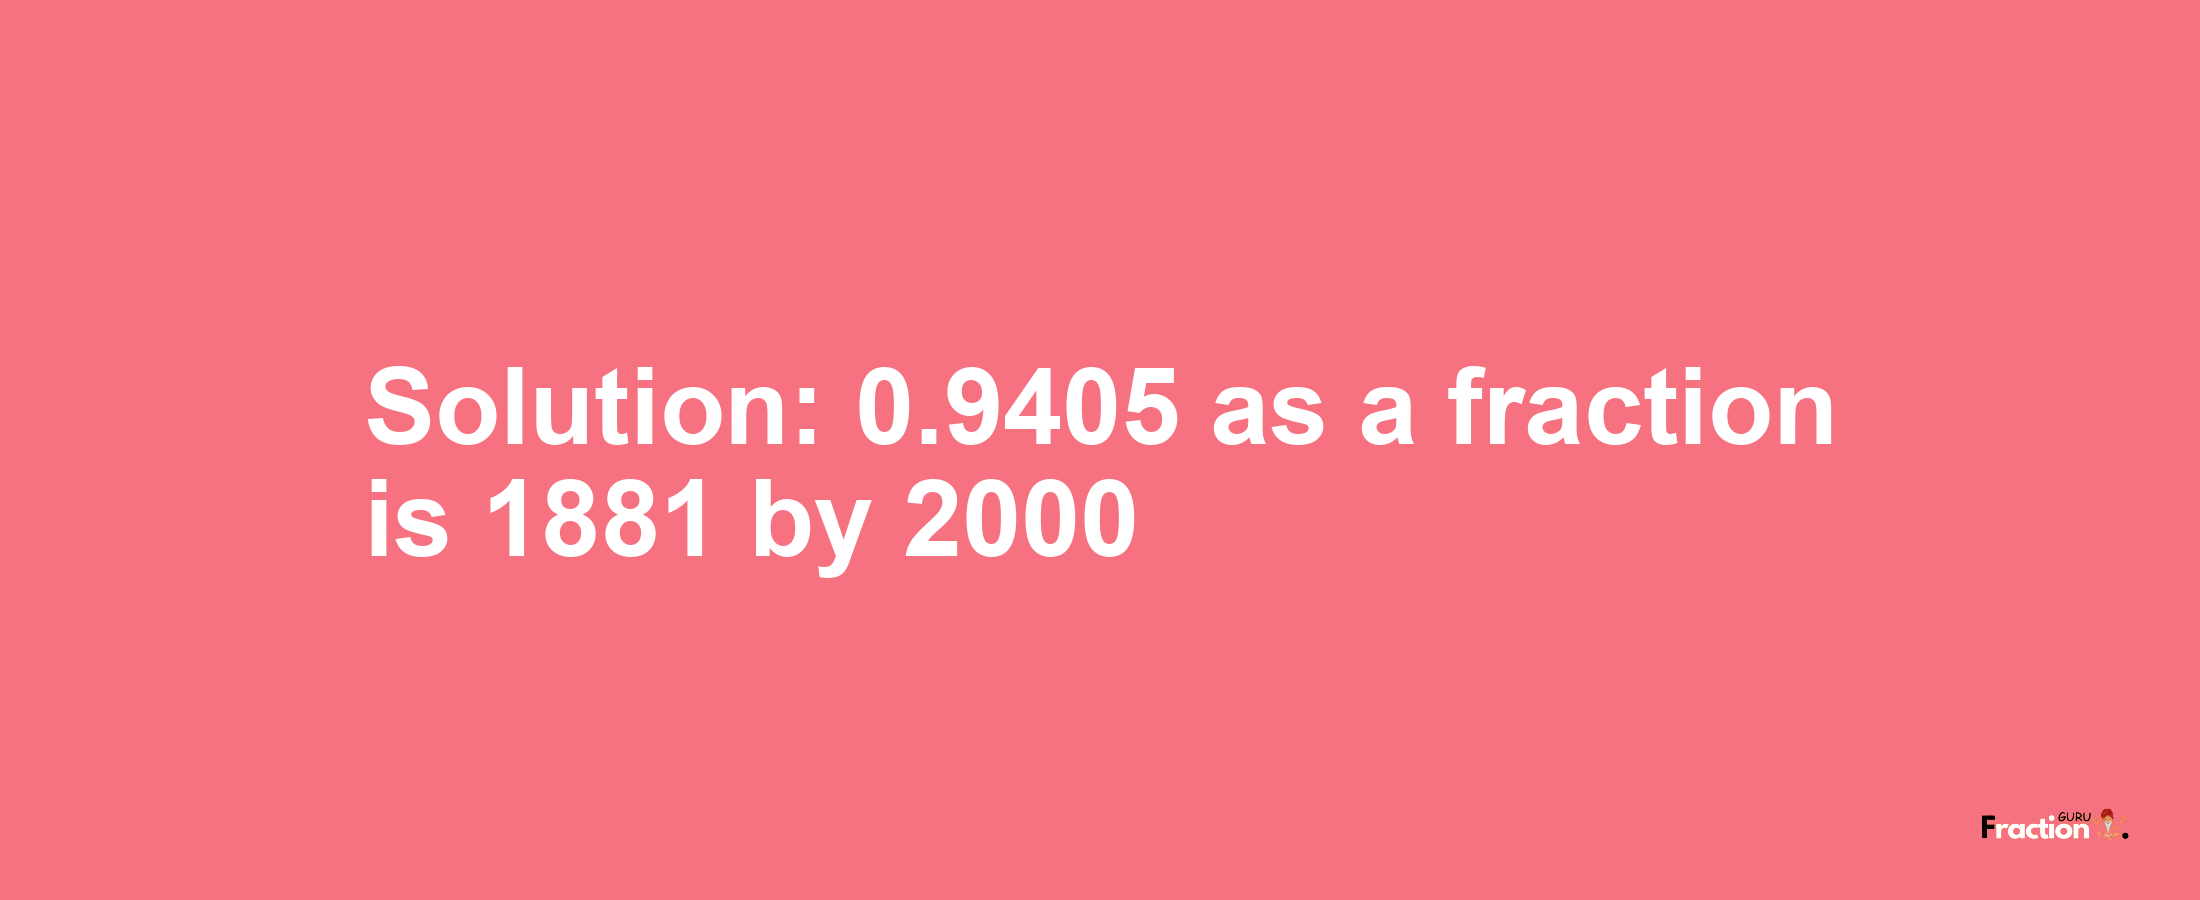 Solution:0.9405 as a fraction is 1881/2000